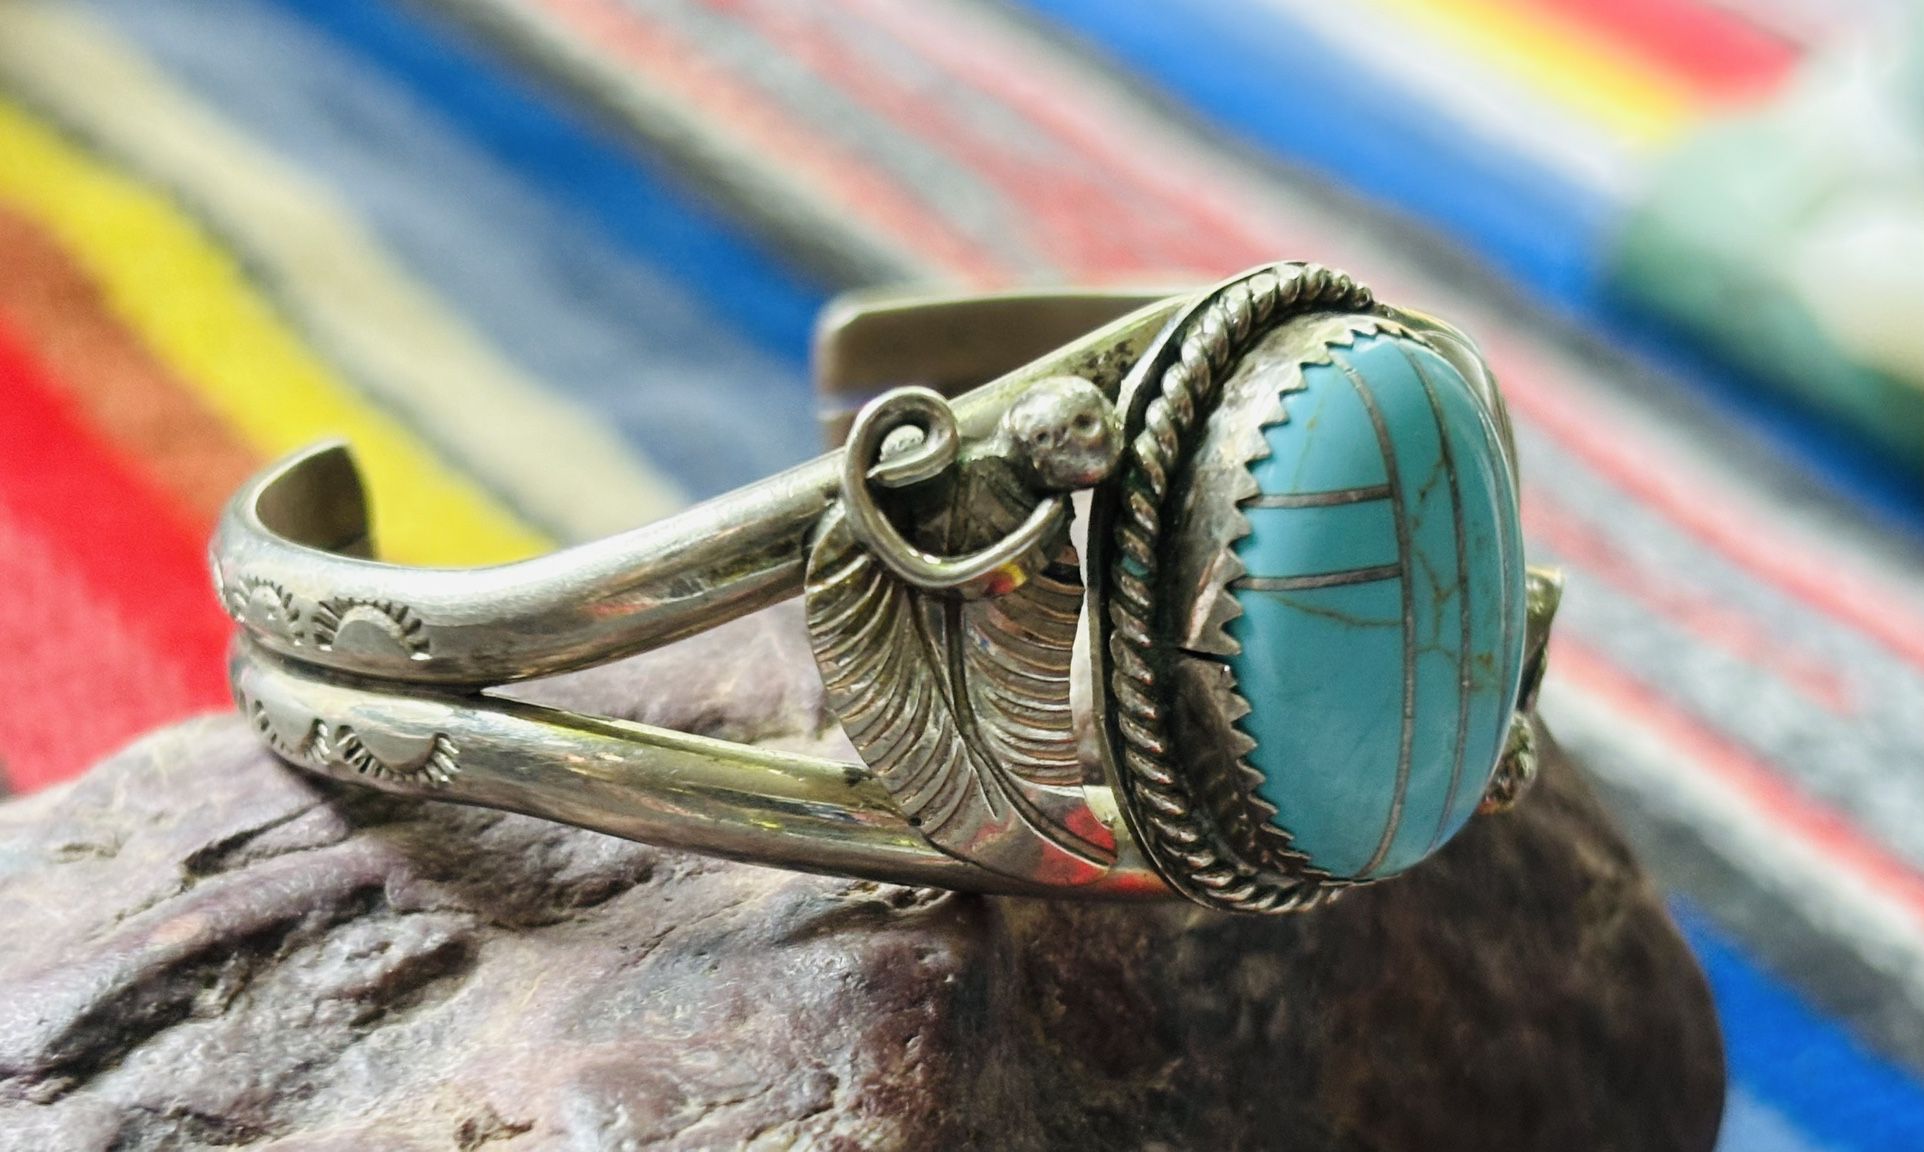 Vintage Silver With Turquoise Inlay Child Bracelet 